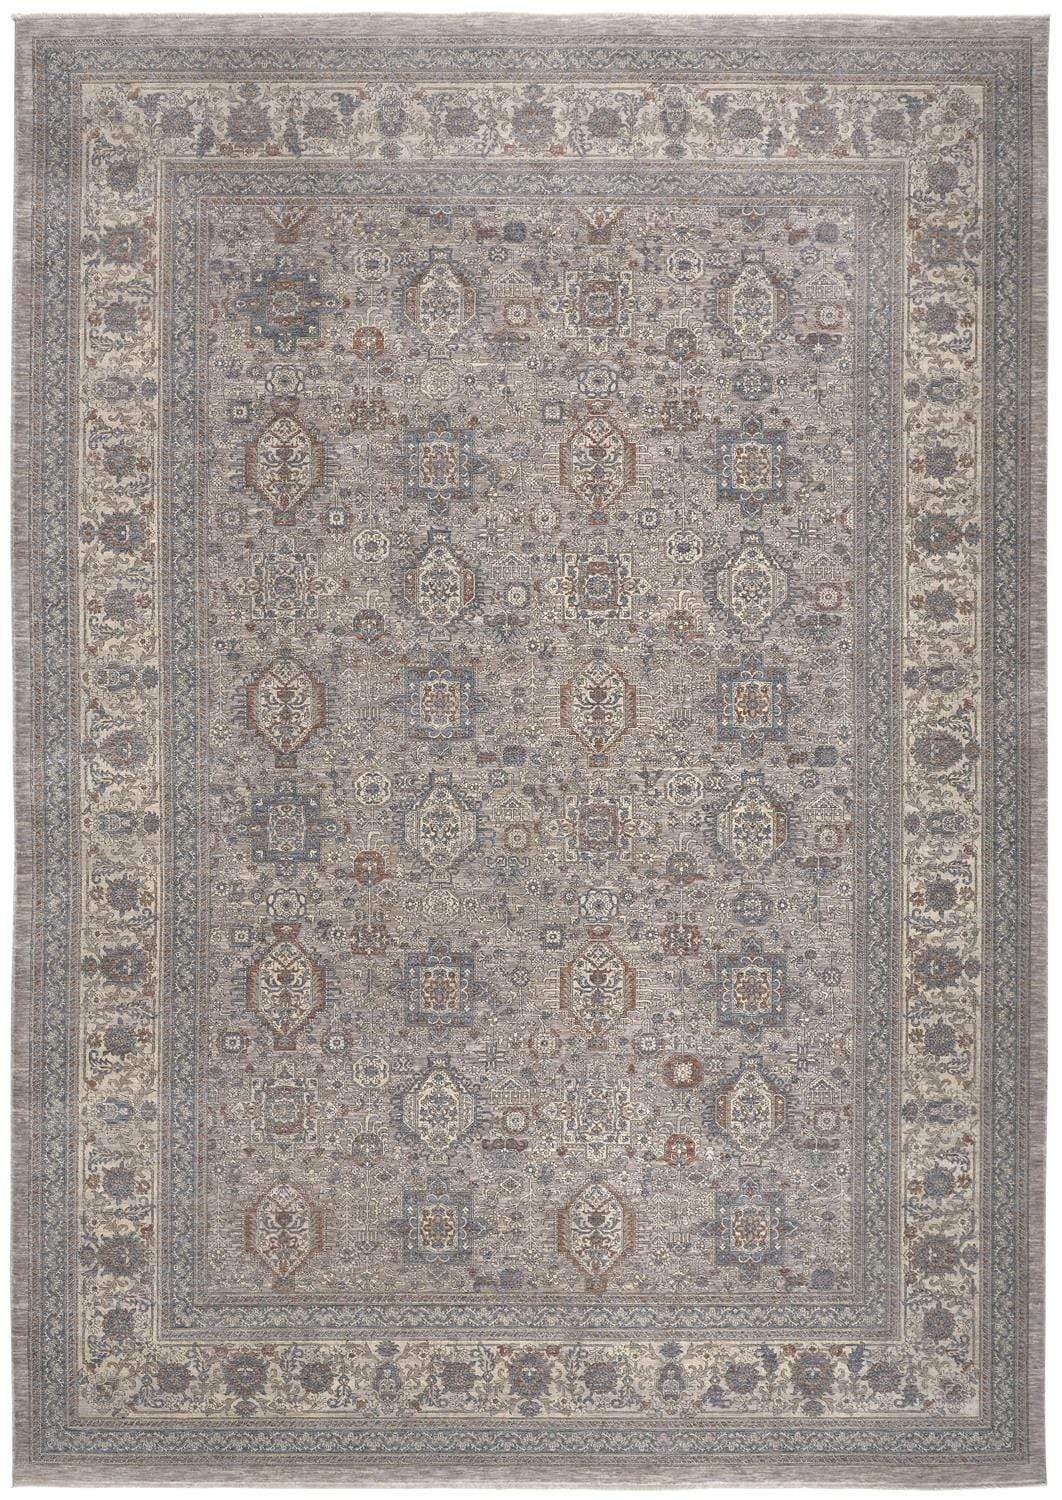 Feizy Feizy Marquette Traditional Persian Style Rug - Warm Gray & Blue - Available in 10 Sizes 4' x 5'-3" MRQ3761FGRYMLTC06